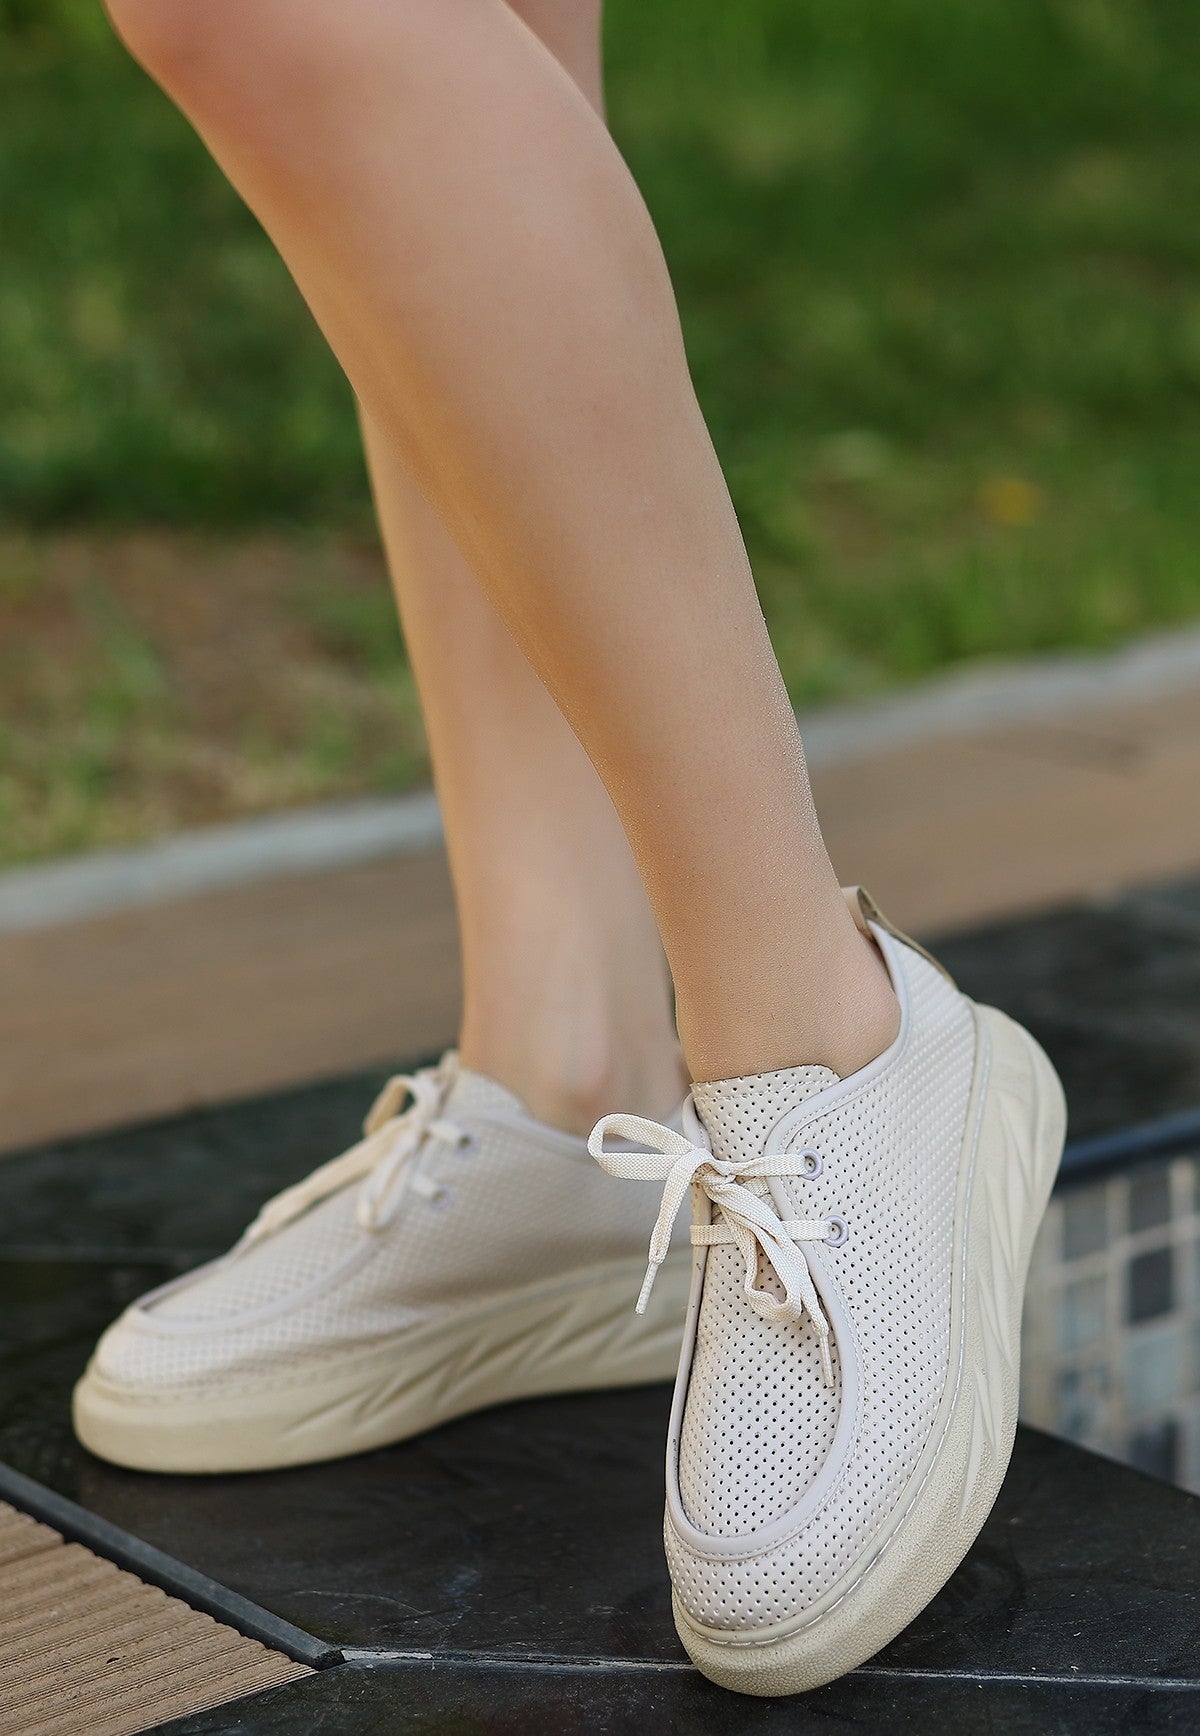 Women's Freya Beige Leather Lace-Up Sports Shoes - STREETMODE™